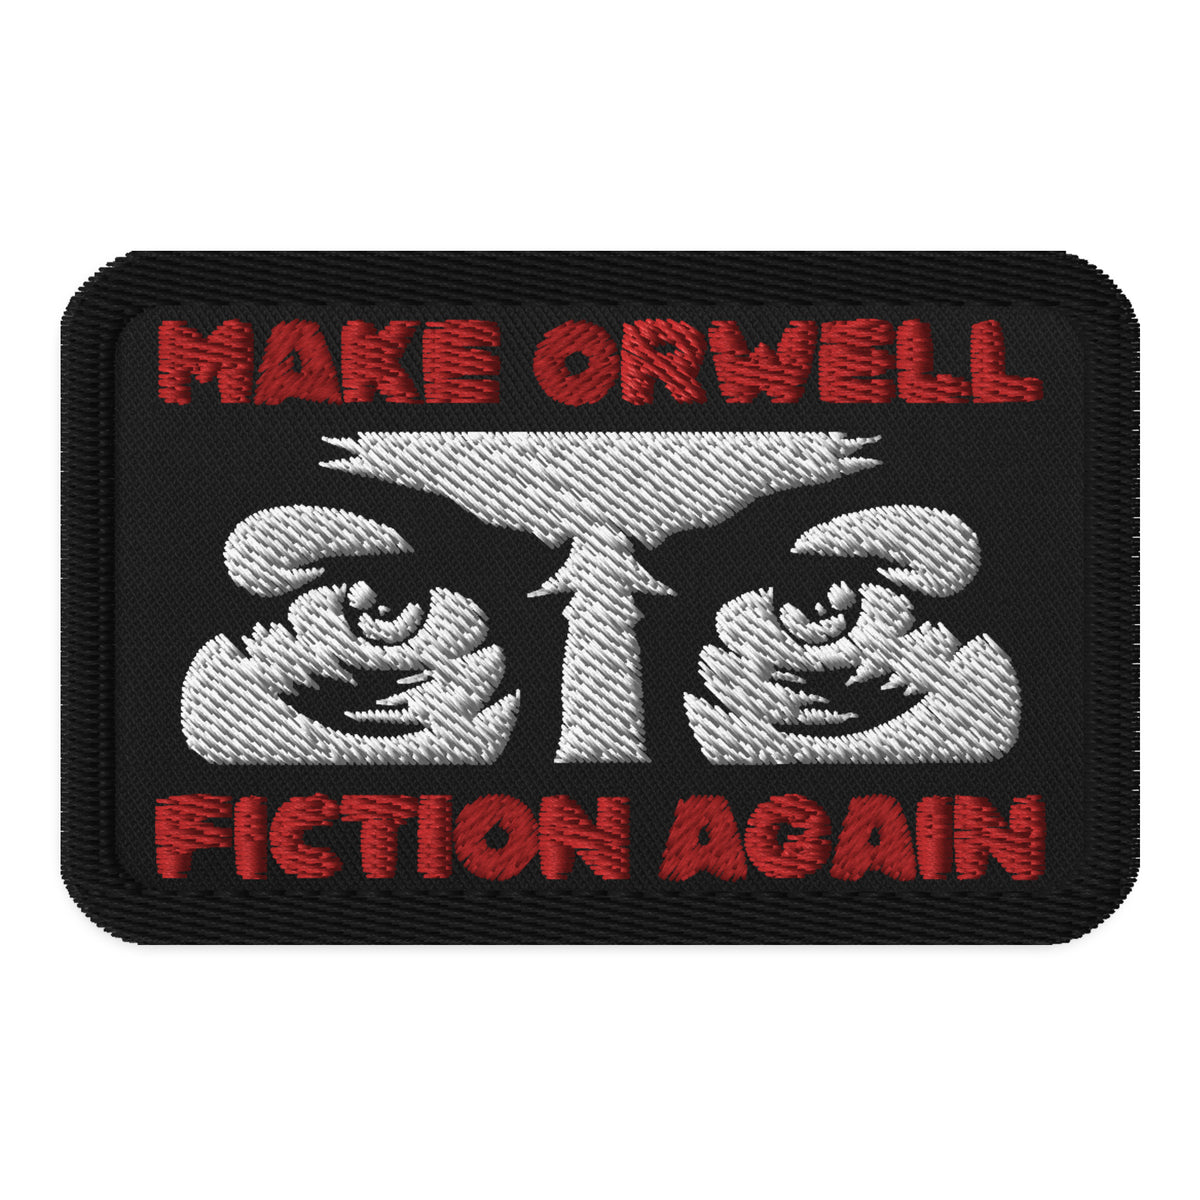 Make Orwell Fiction Again Embroidered Patch